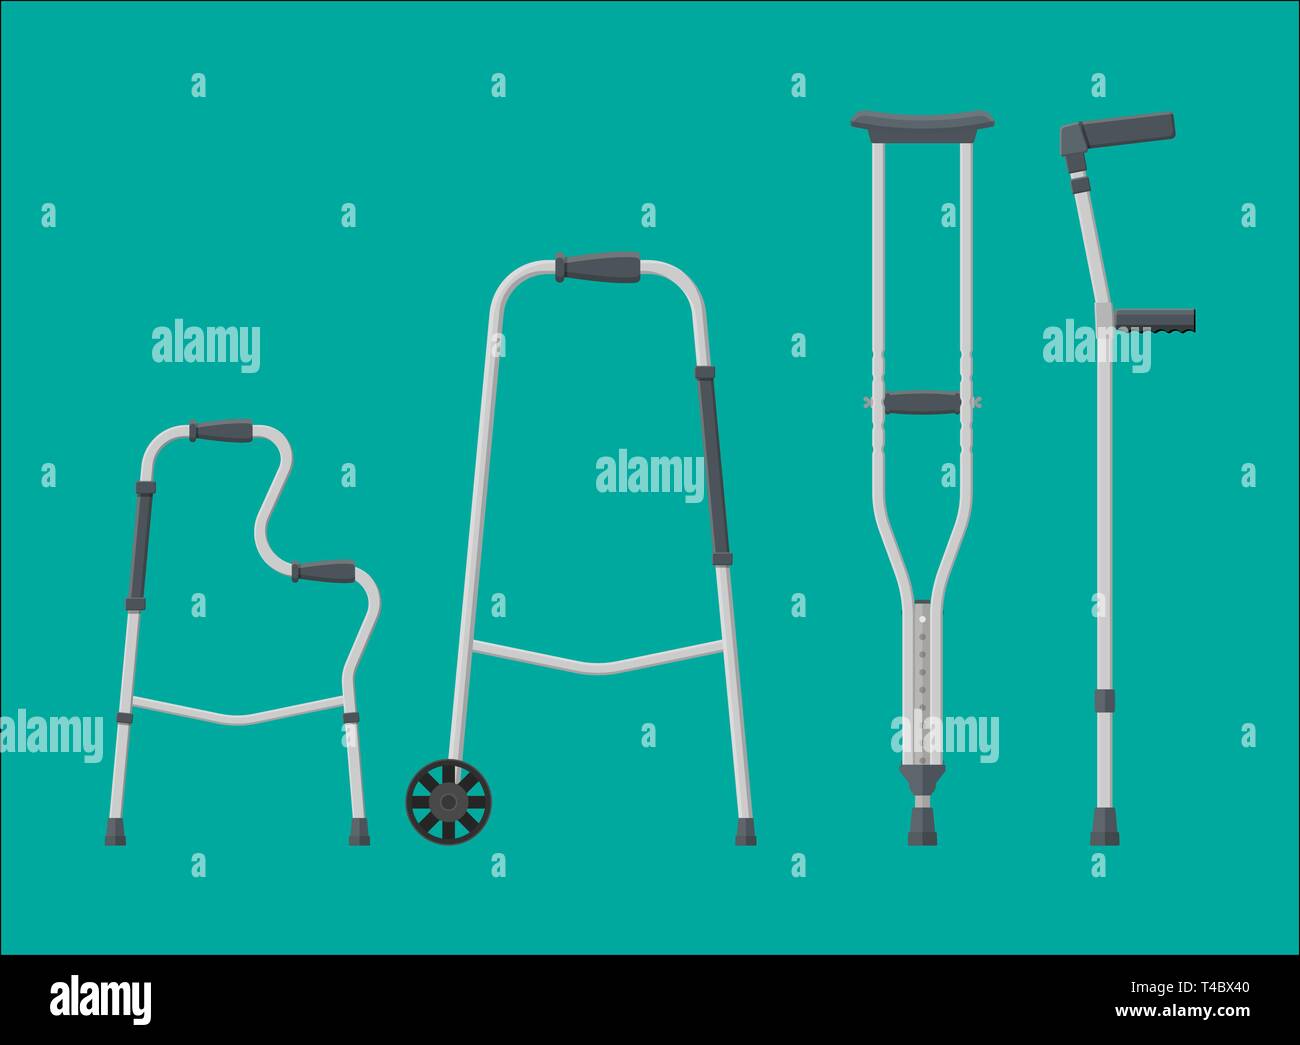 Set of mobility aids. Walker, crutches, quad cane, forearm crutches. Goods for disabled people. Healthcare, hospital and medical diagnostics. Vector i Stock Vector